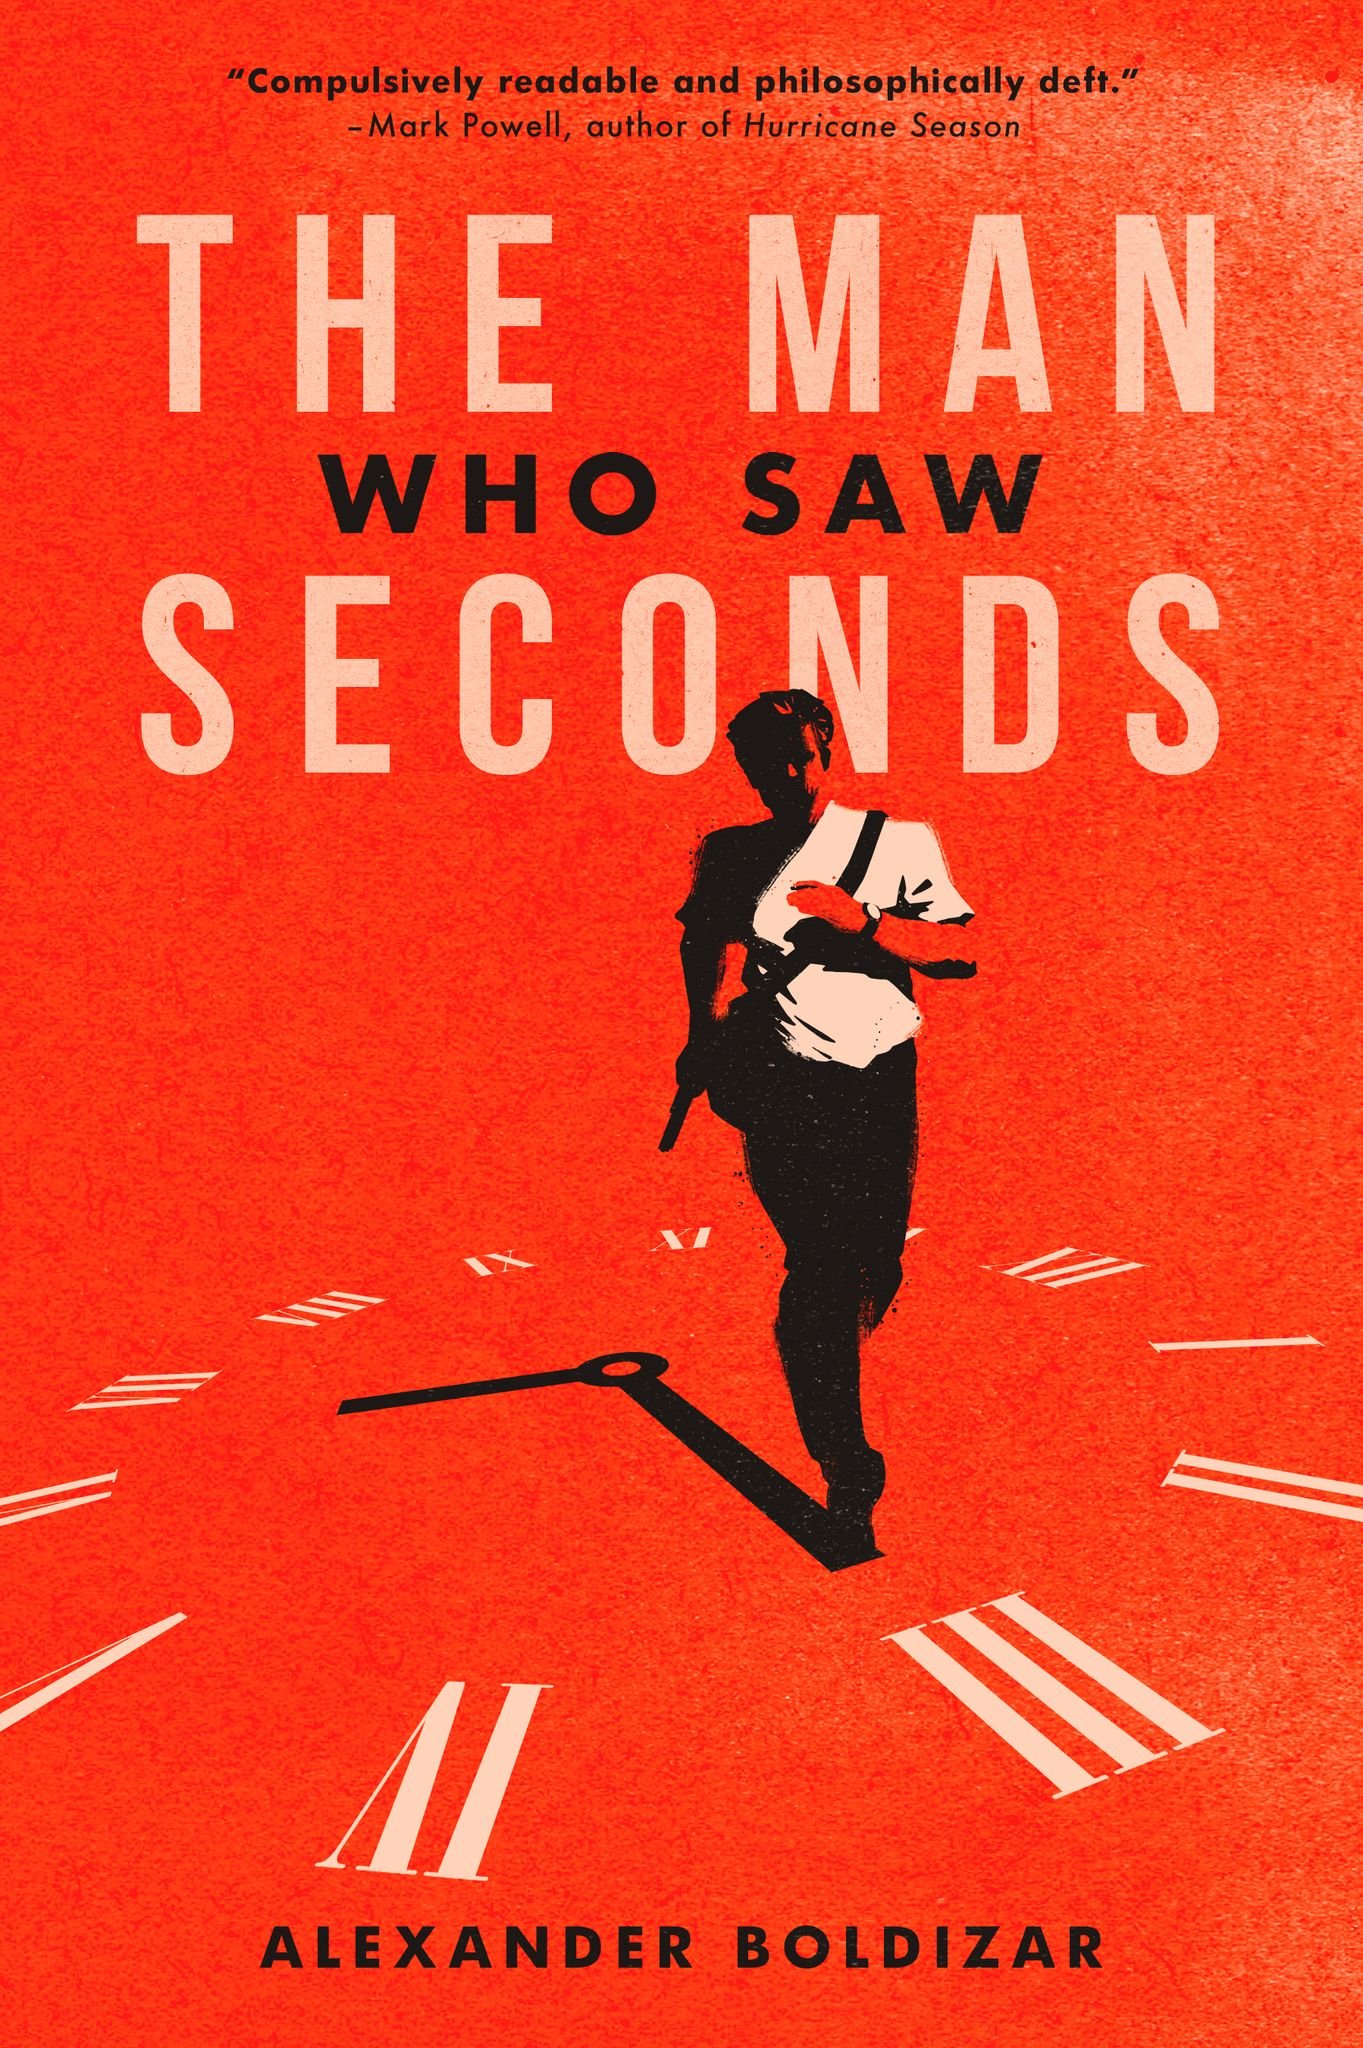 The Secret Life of Seconds: The Minds Behind the World Chess